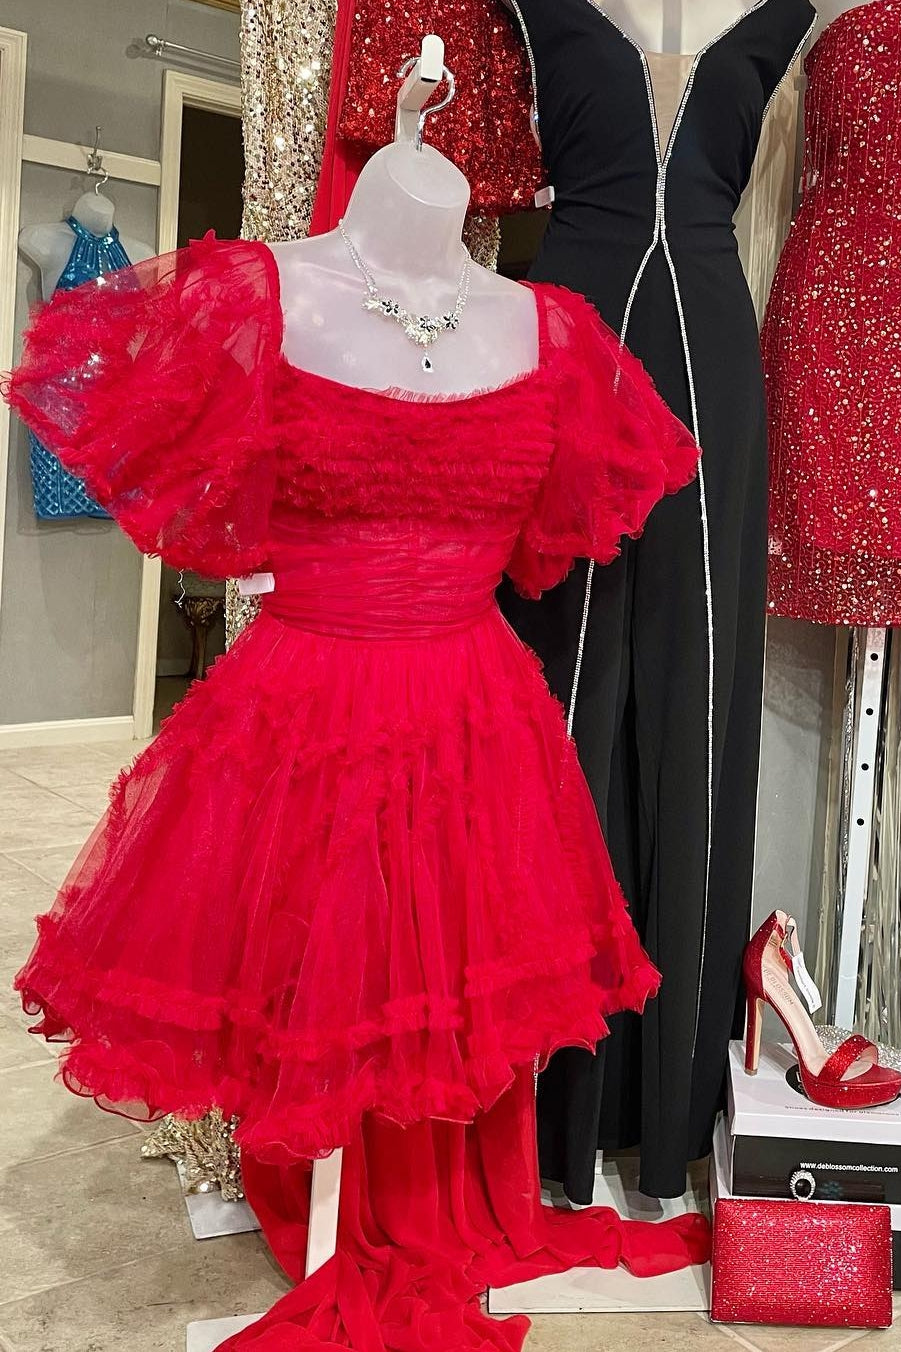 Red Tulle Puff Sleeves Ruffles Tulle Corset Homecoming Dress outfit, Party Dress Idea